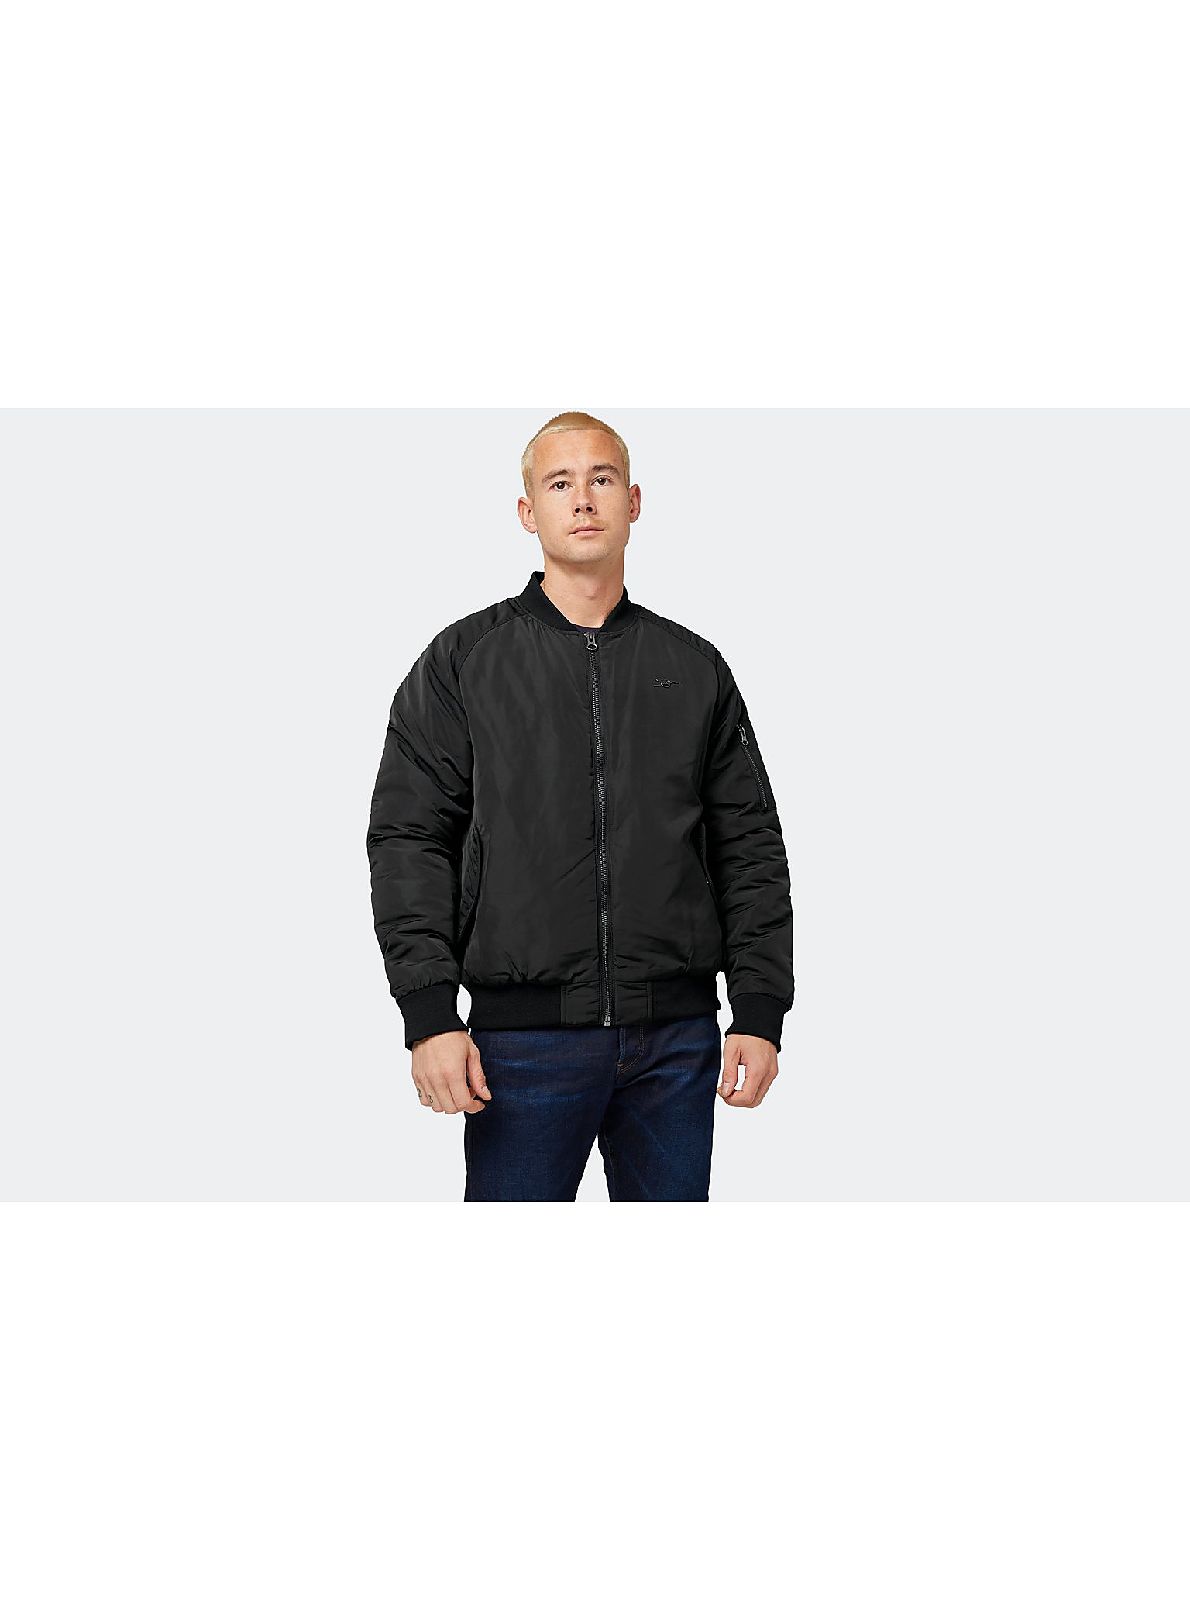 Arsenal Bomber Jacket | Official Online Store